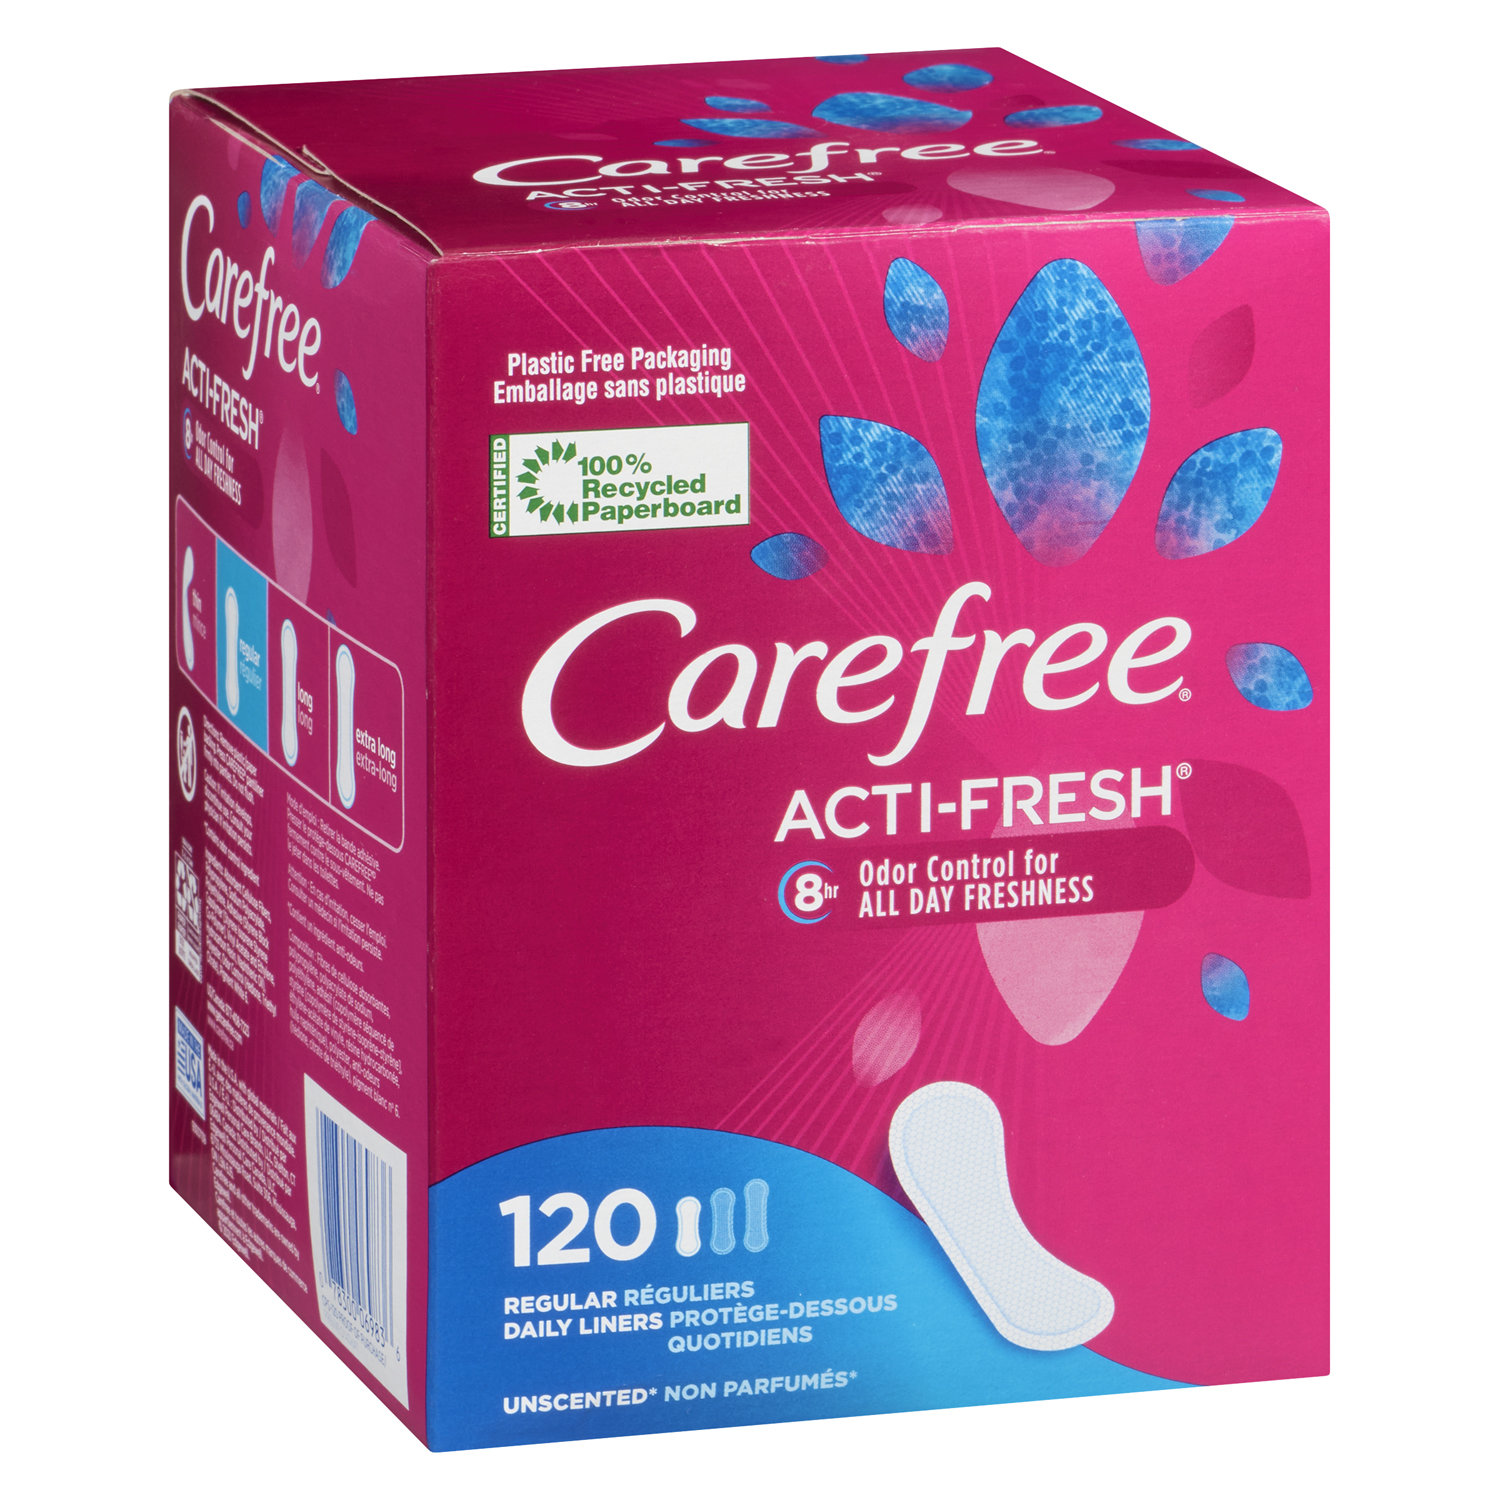 Carefree Acti Fresh Body Shape Pantiliners 60 Count Each